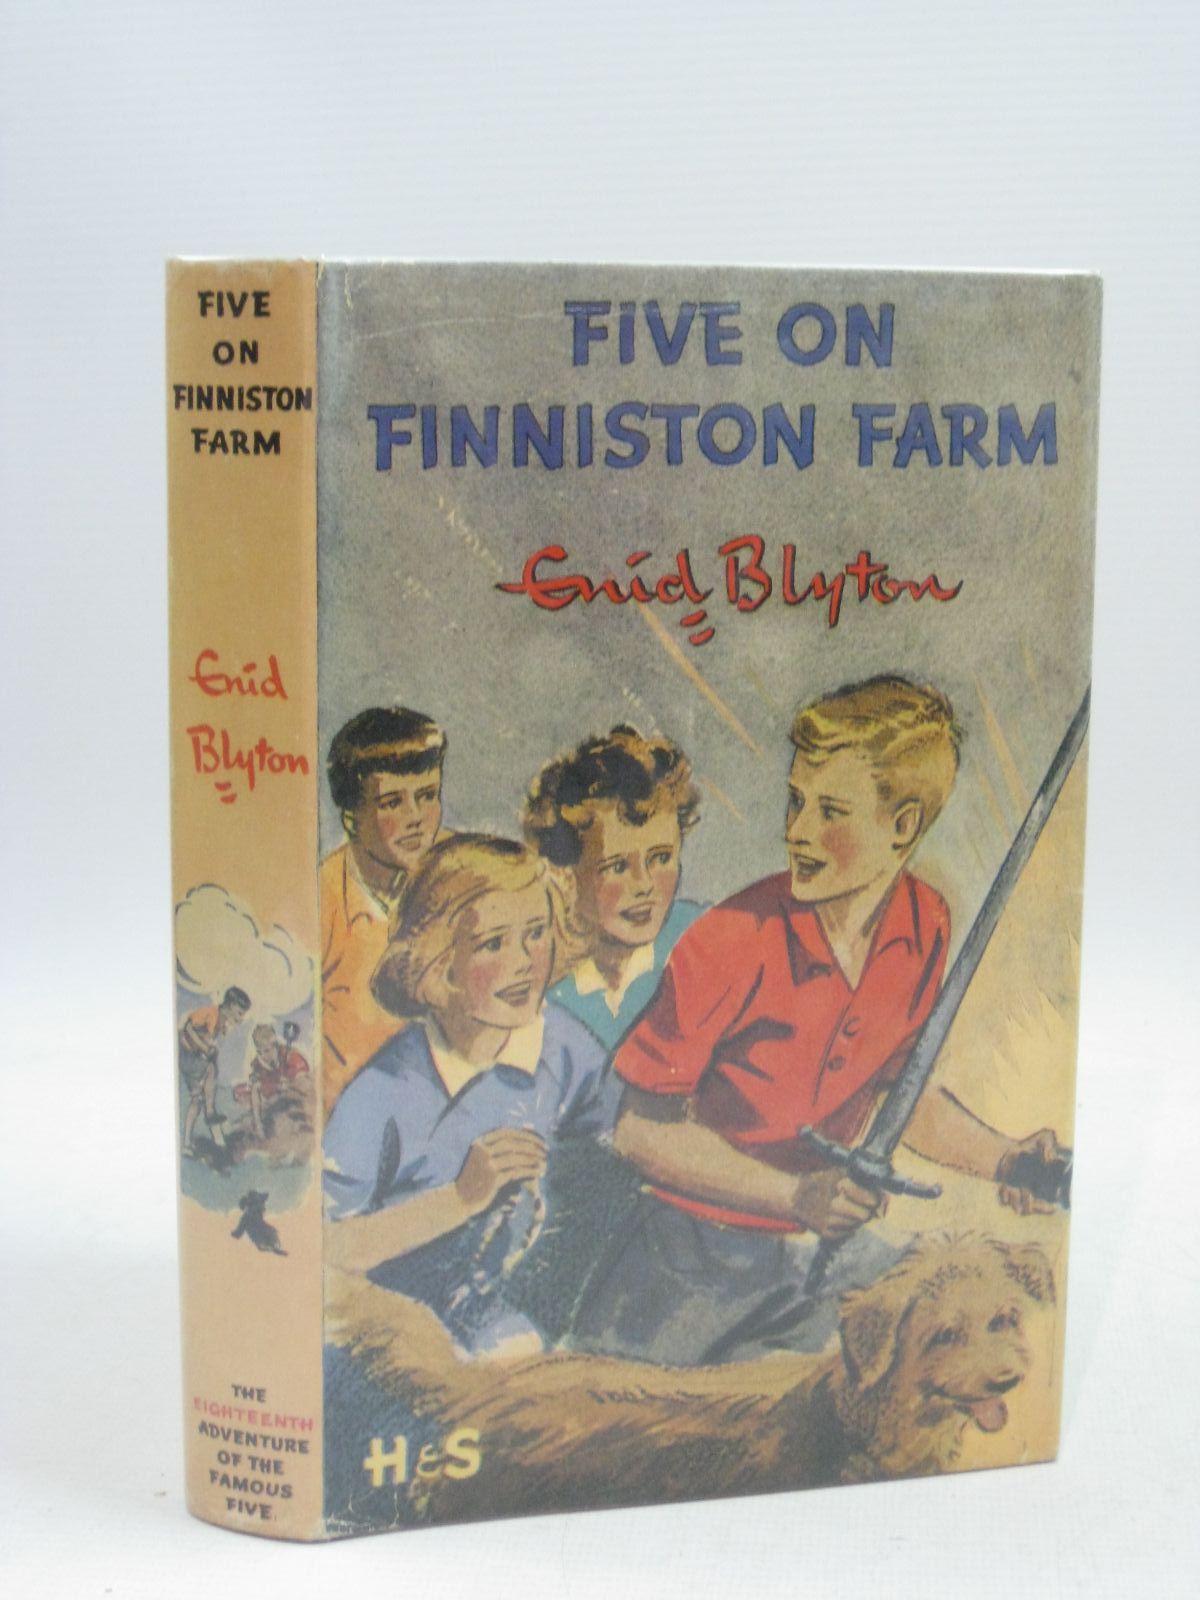 Cover of FIVE ON FINNISTON FARM by Enid Blyton